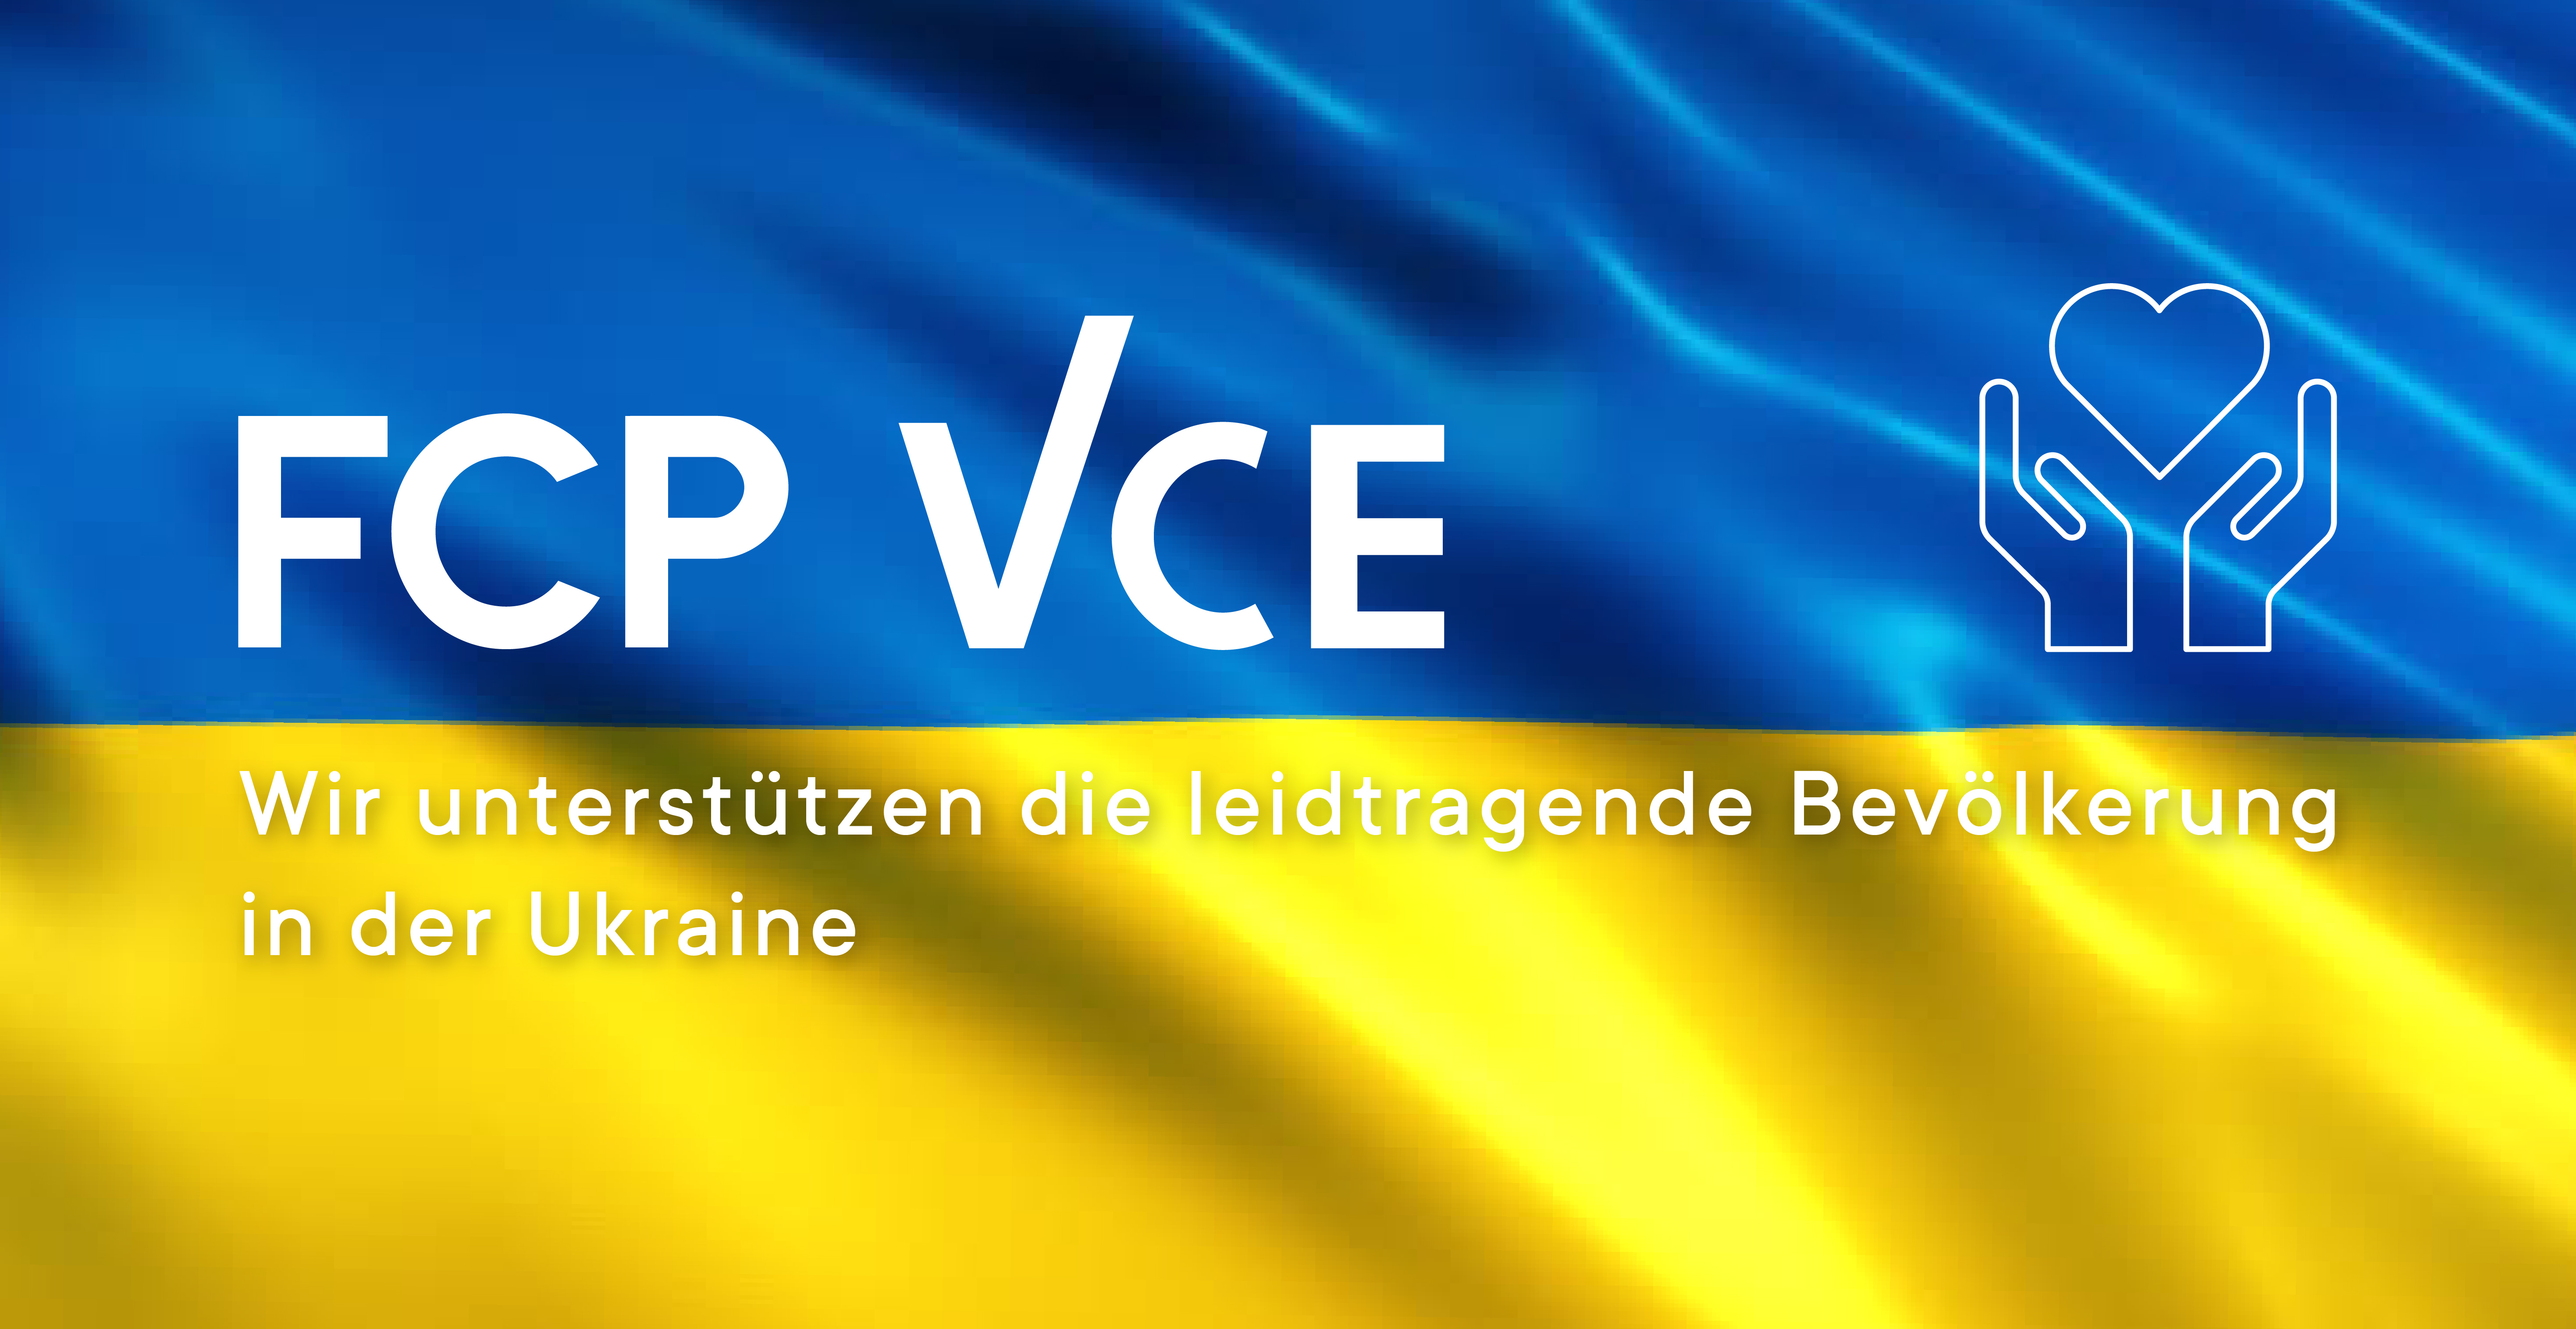 FCP.VCE stands with Ukraine